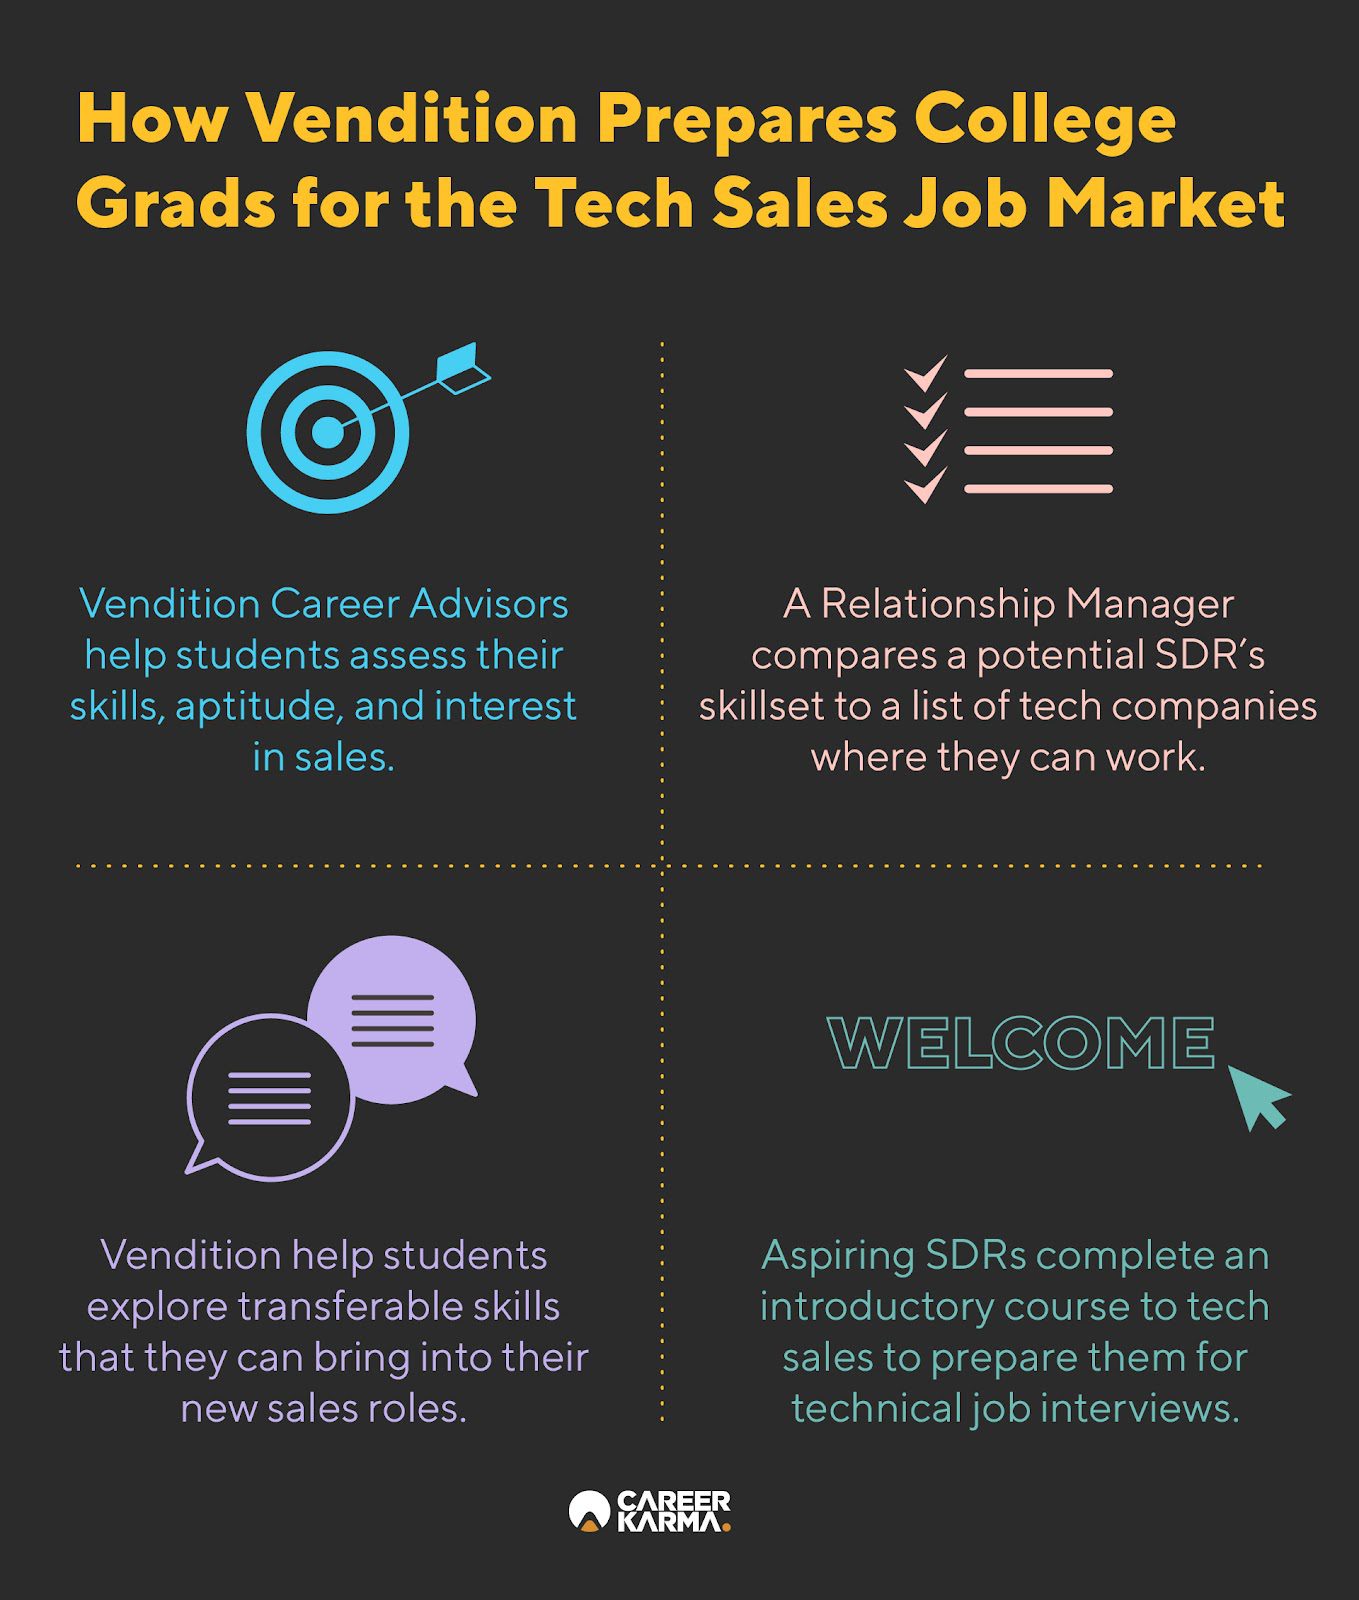 An infographic showing how Vendition prepares apprentices for the job market